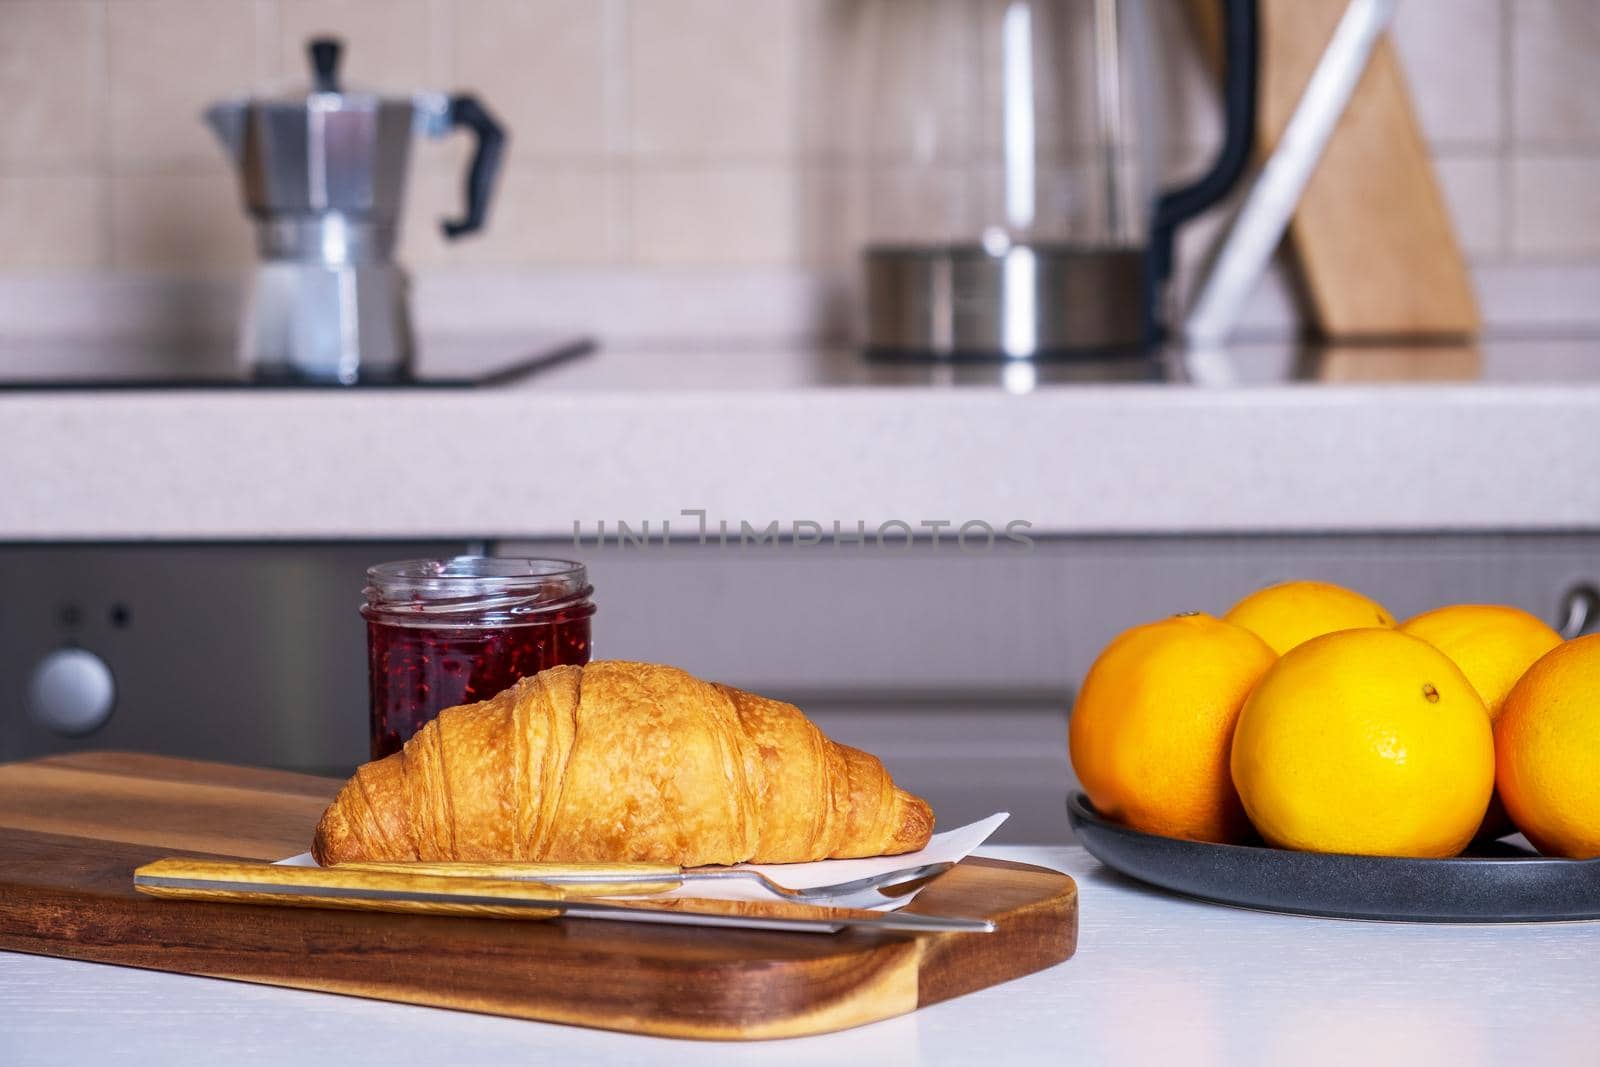 Wooden serving board with fresh croissant and jam and dish of oranges lies on kitchen table in a cozy kitchen. Selective focus.